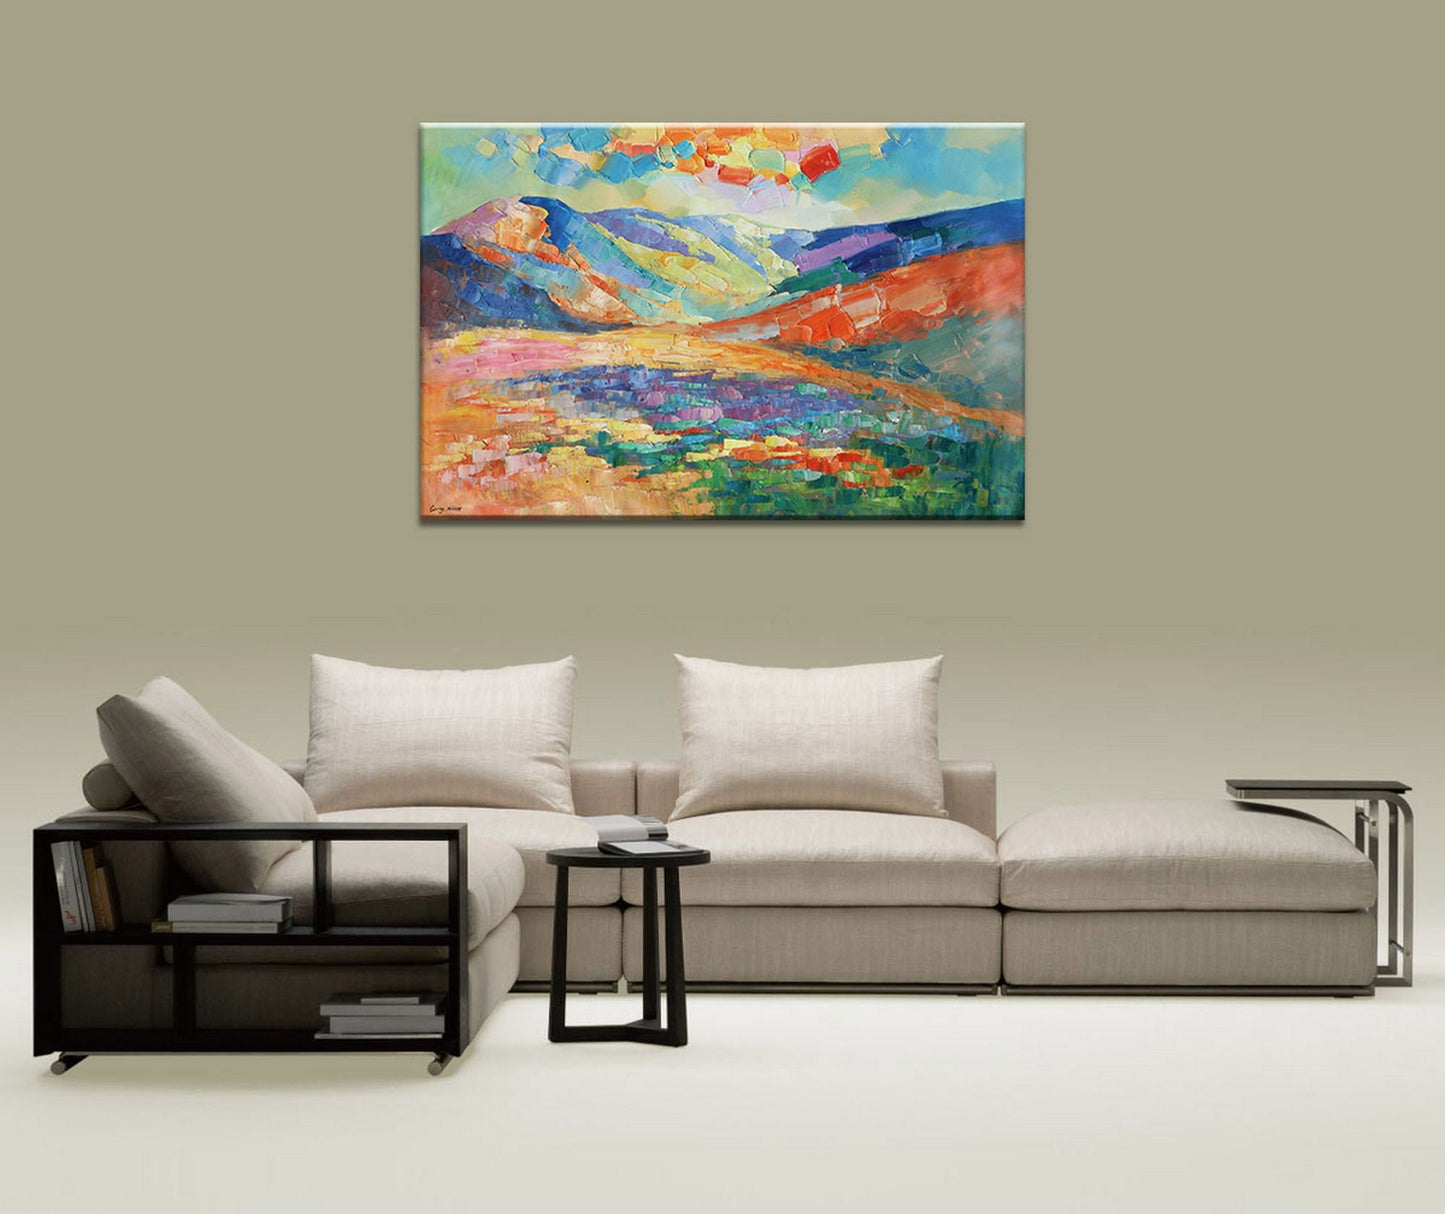 Large Oil Painting Landscape, Original Abstract Art, Painting Abstract, Wall Hanging, Modern Painting, Large Abstract Painting, Abstract Art